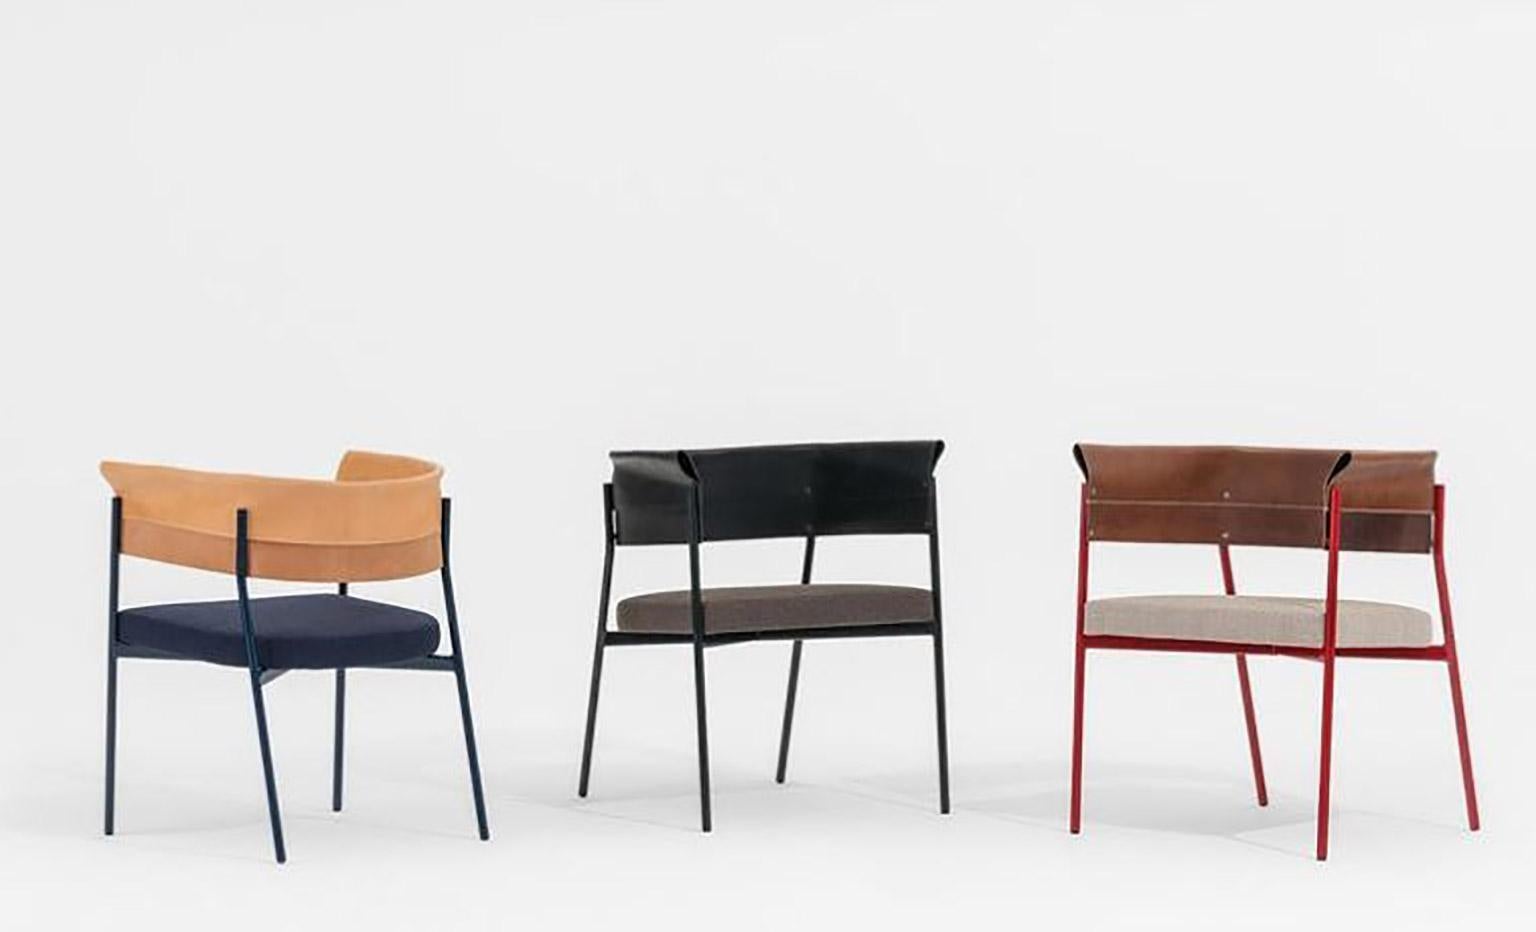 Armchair made with a thin and elegant hand-welded steel frame whose curvature supports the precious leather, folded and sewn to act as a backrest and the same time as an armrest. Available in red, blue, black structure as per the full-grain leather